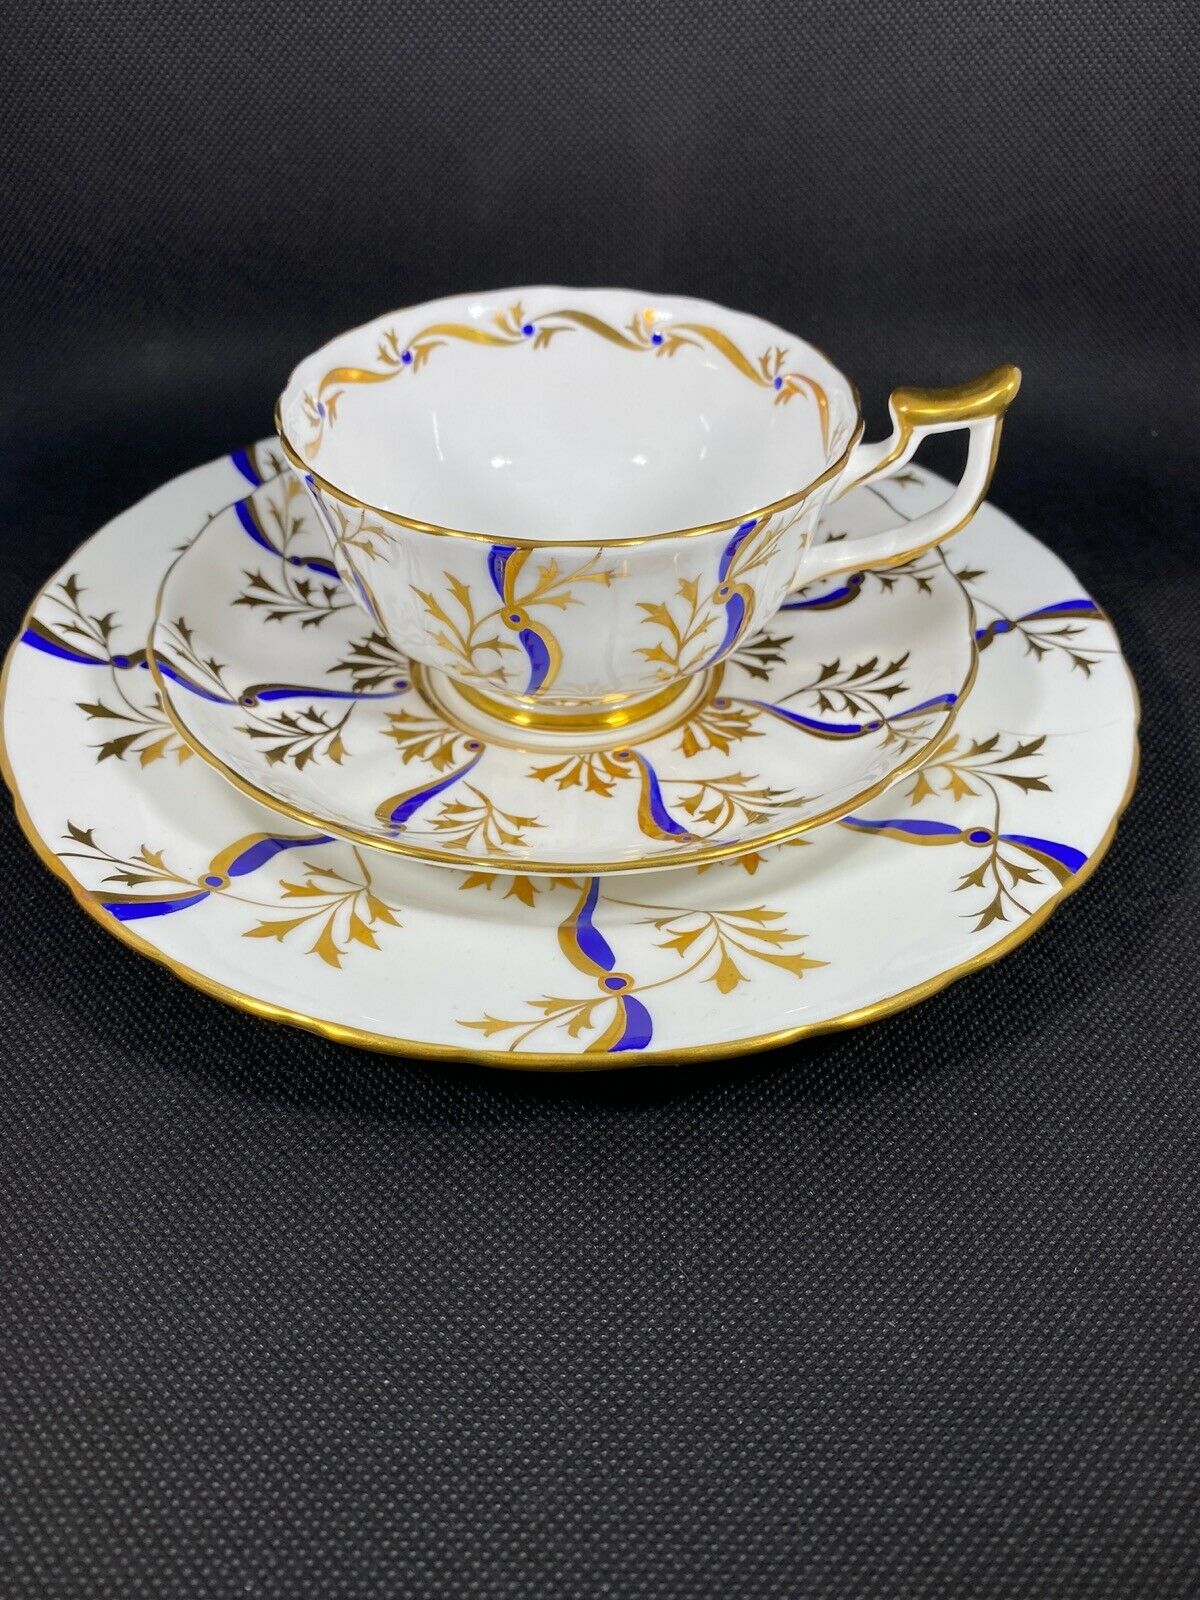 Stunning Royal Chelsea China Tea Cup Saucer Trio Royal Blue & Gold Batwing Regal